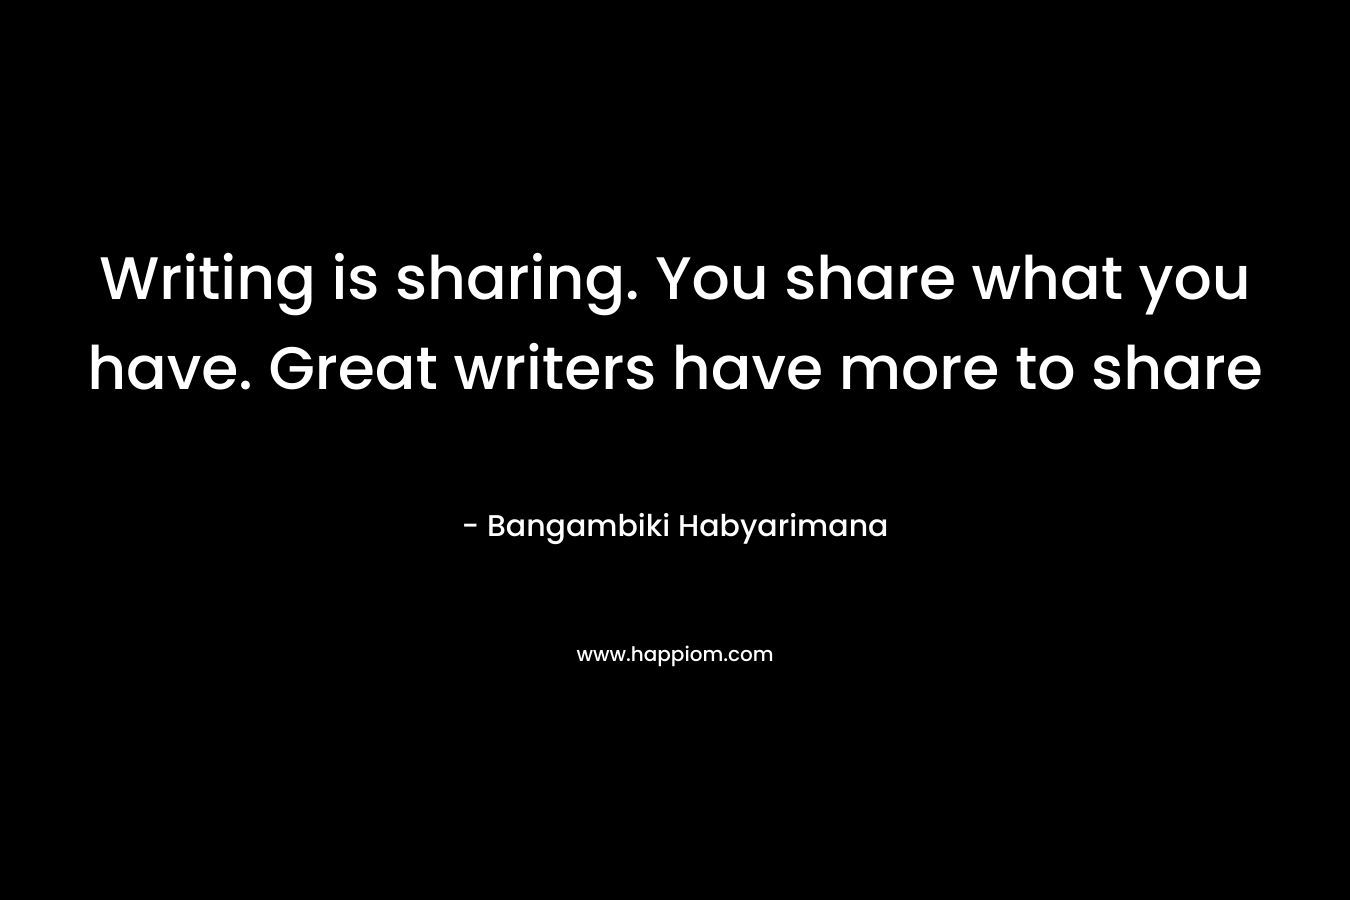 Writing is sharing. You share what you have. Great writers have more to share